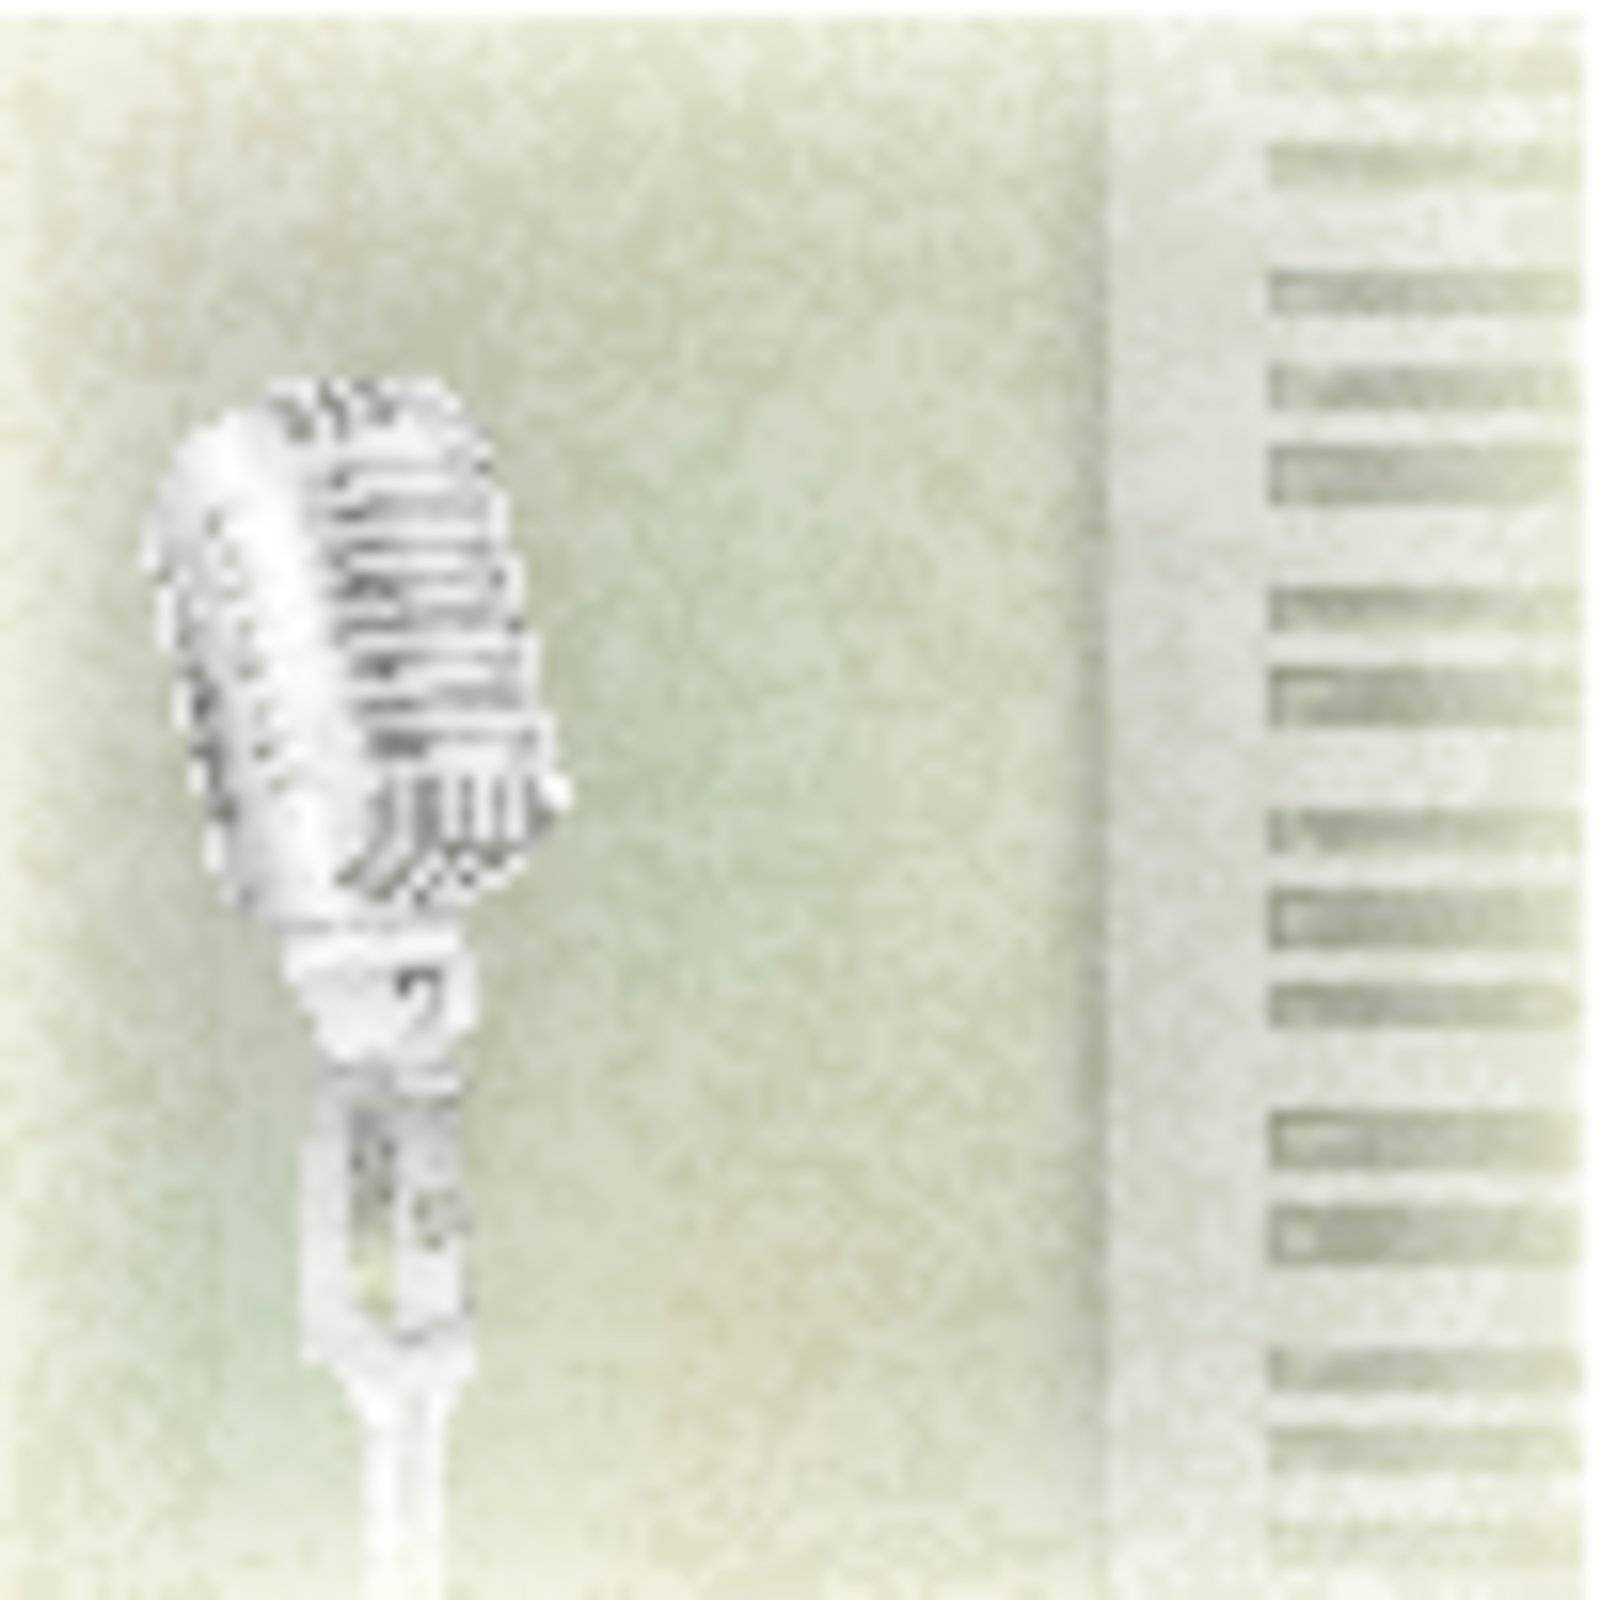 abstract music background with retro microphone by lem